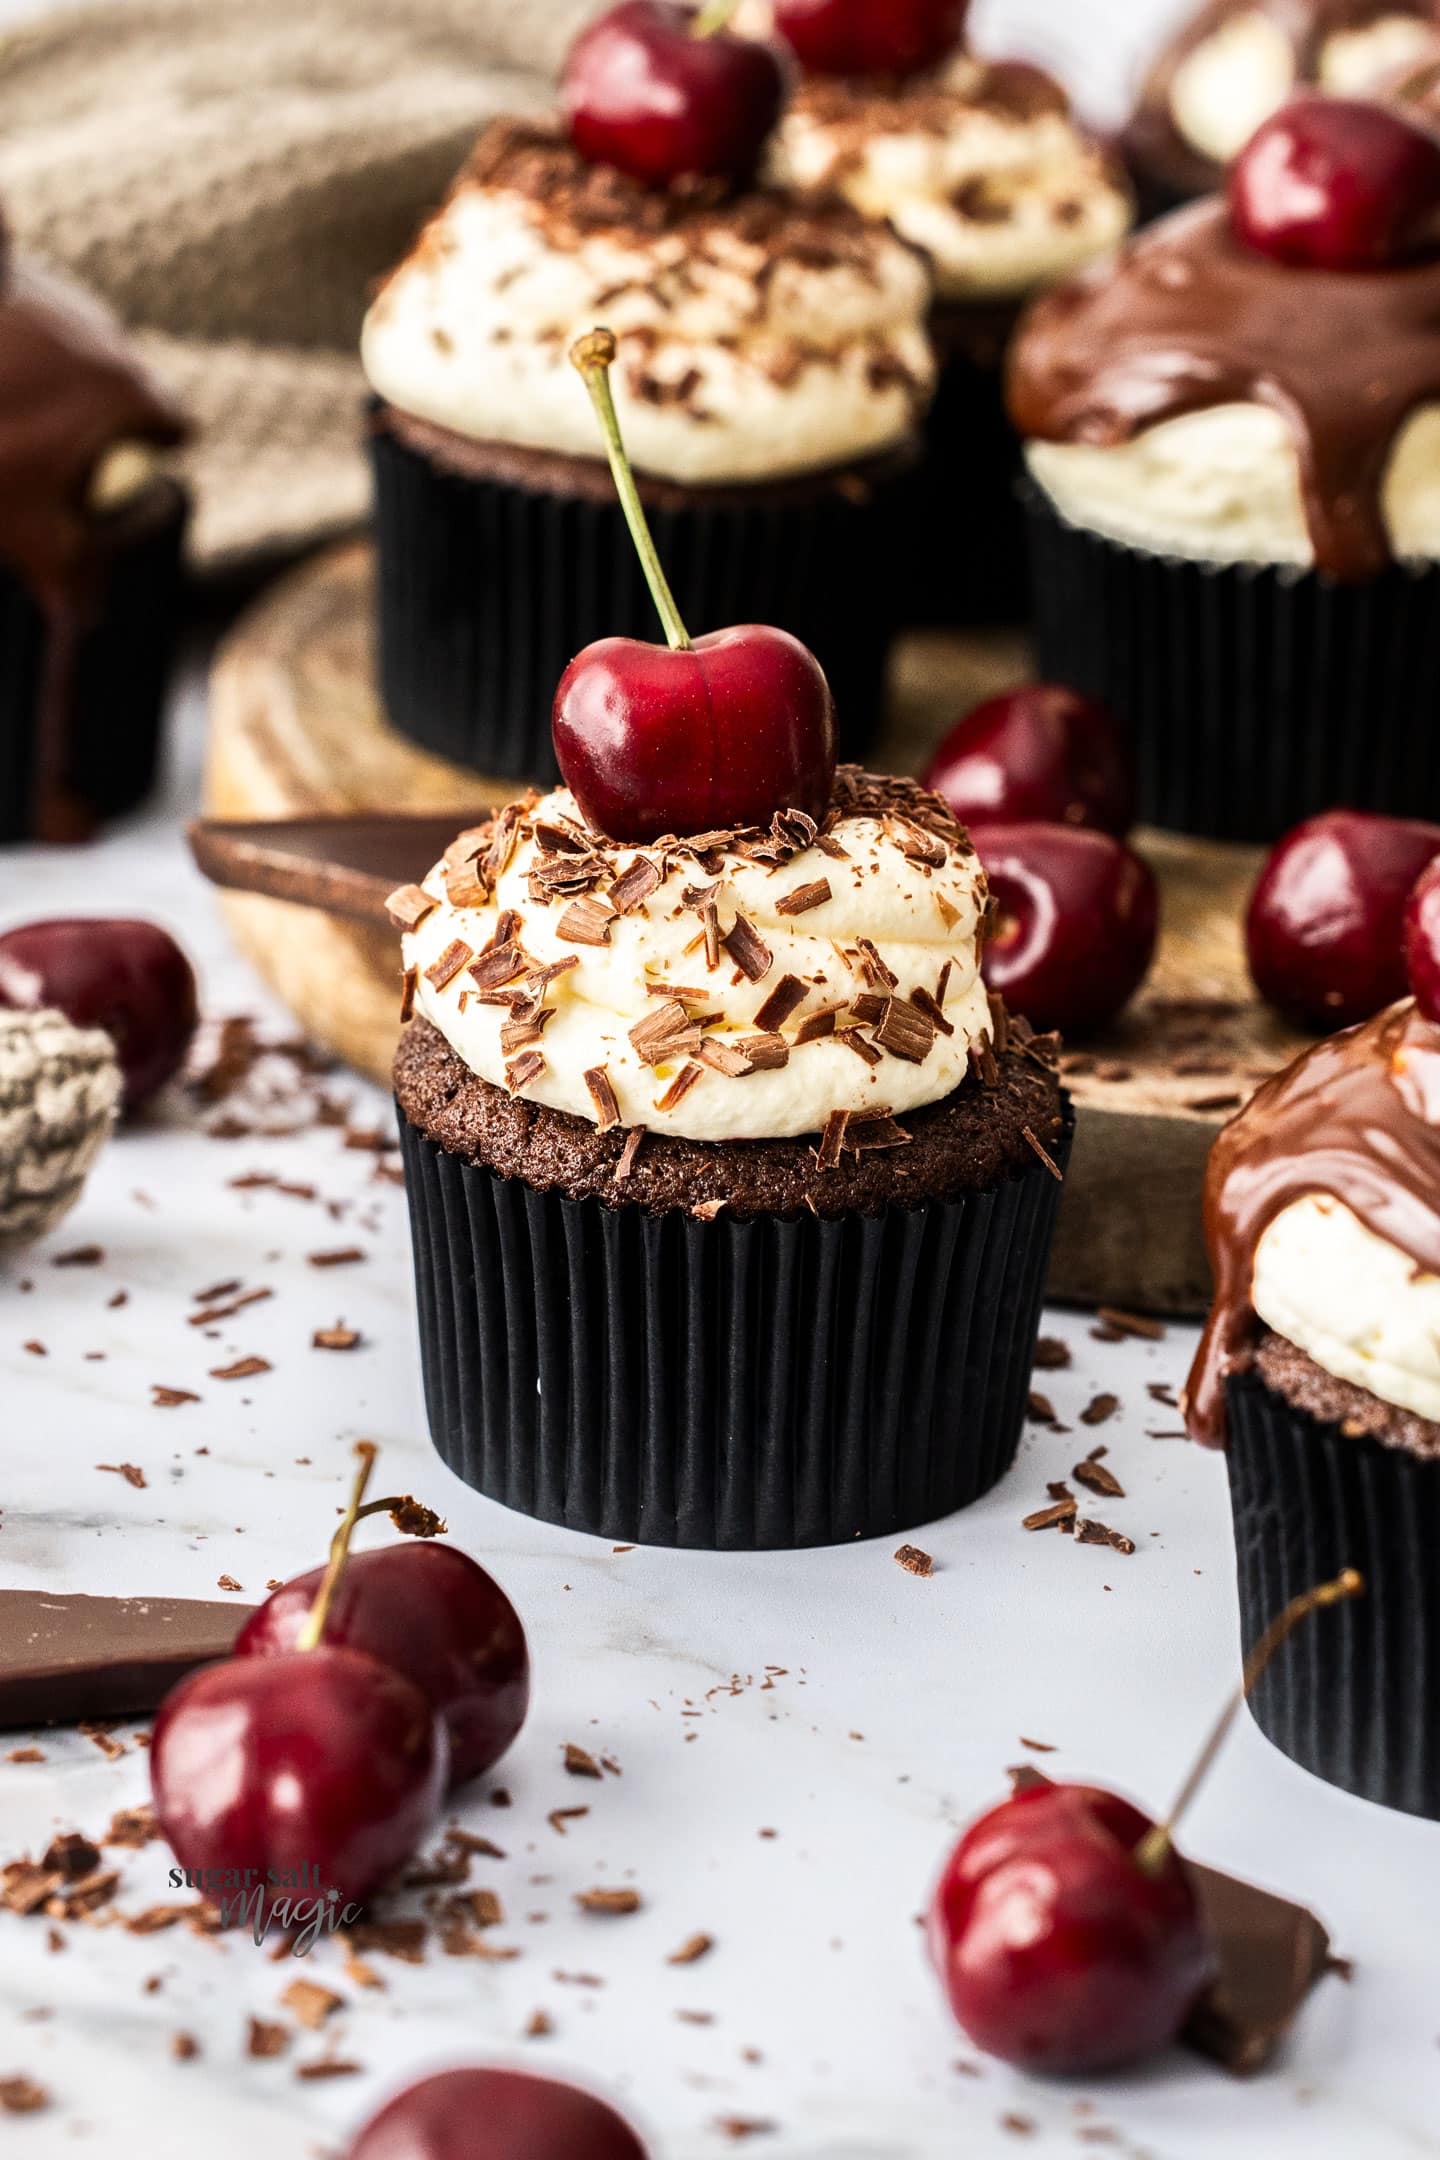 A single black forest cupcake with chocolate shavings.